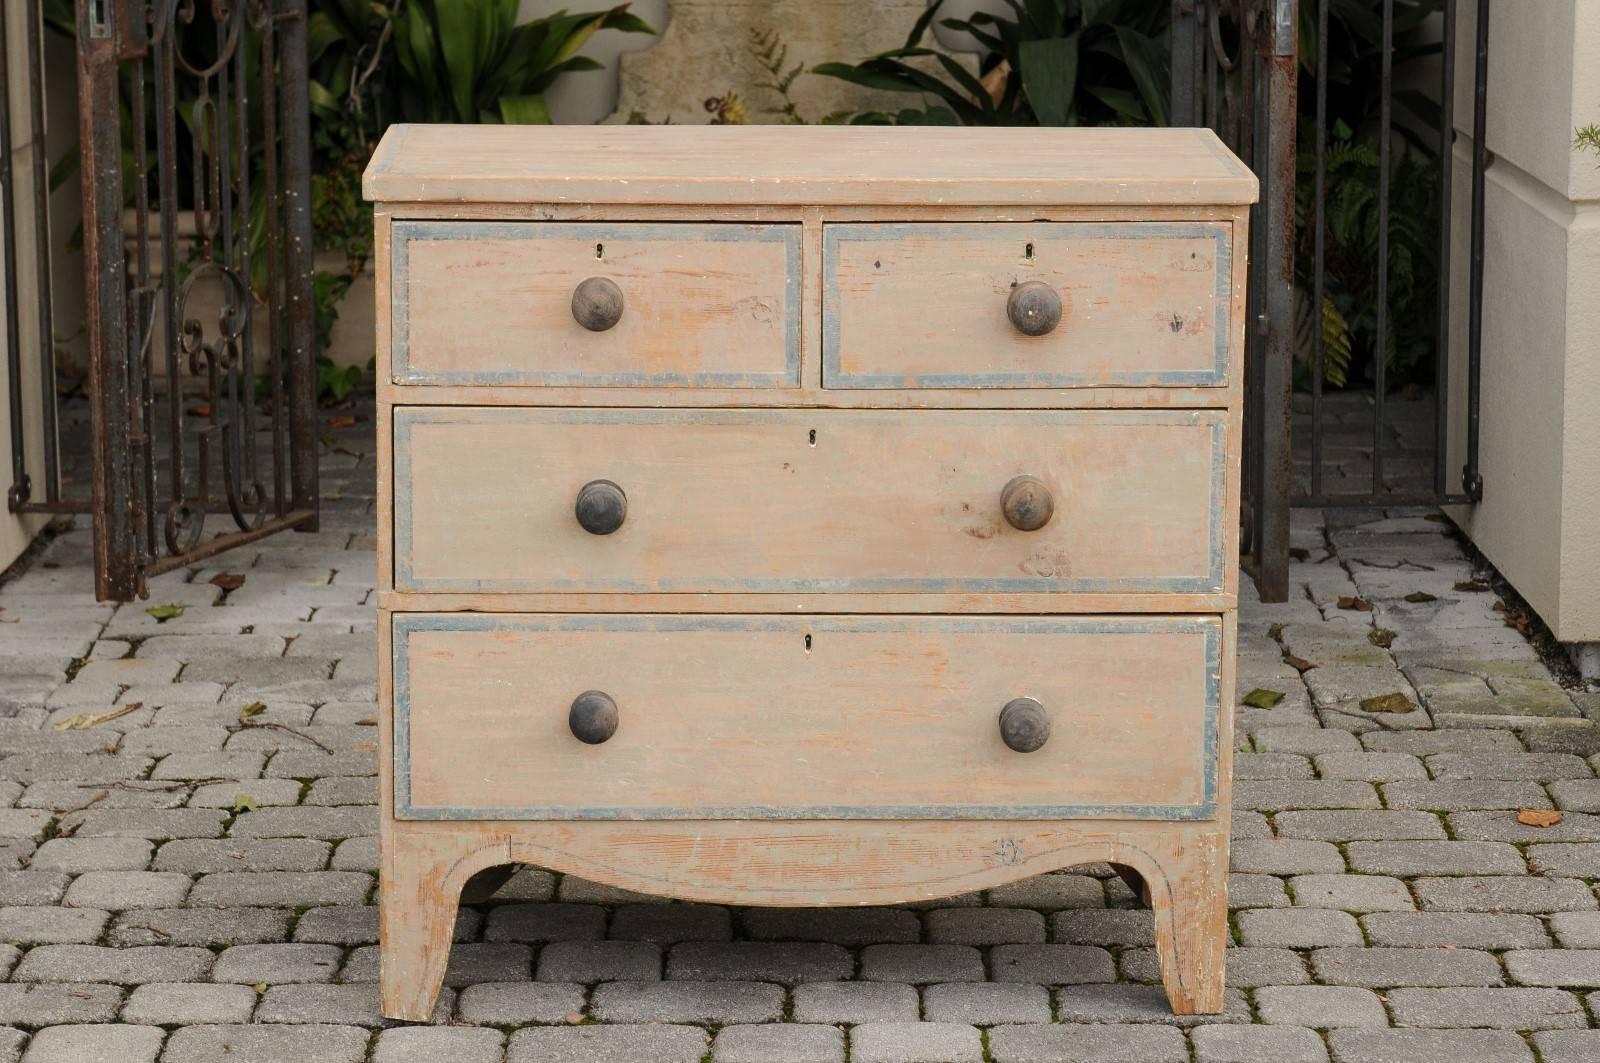 An English painted wood four-drawer chest from the mid-19th century with original paint. This English wooden commode, circa 1840 features a rectangular top over four dovetailed drawers. The upper section showcases two smaller drawers placed above